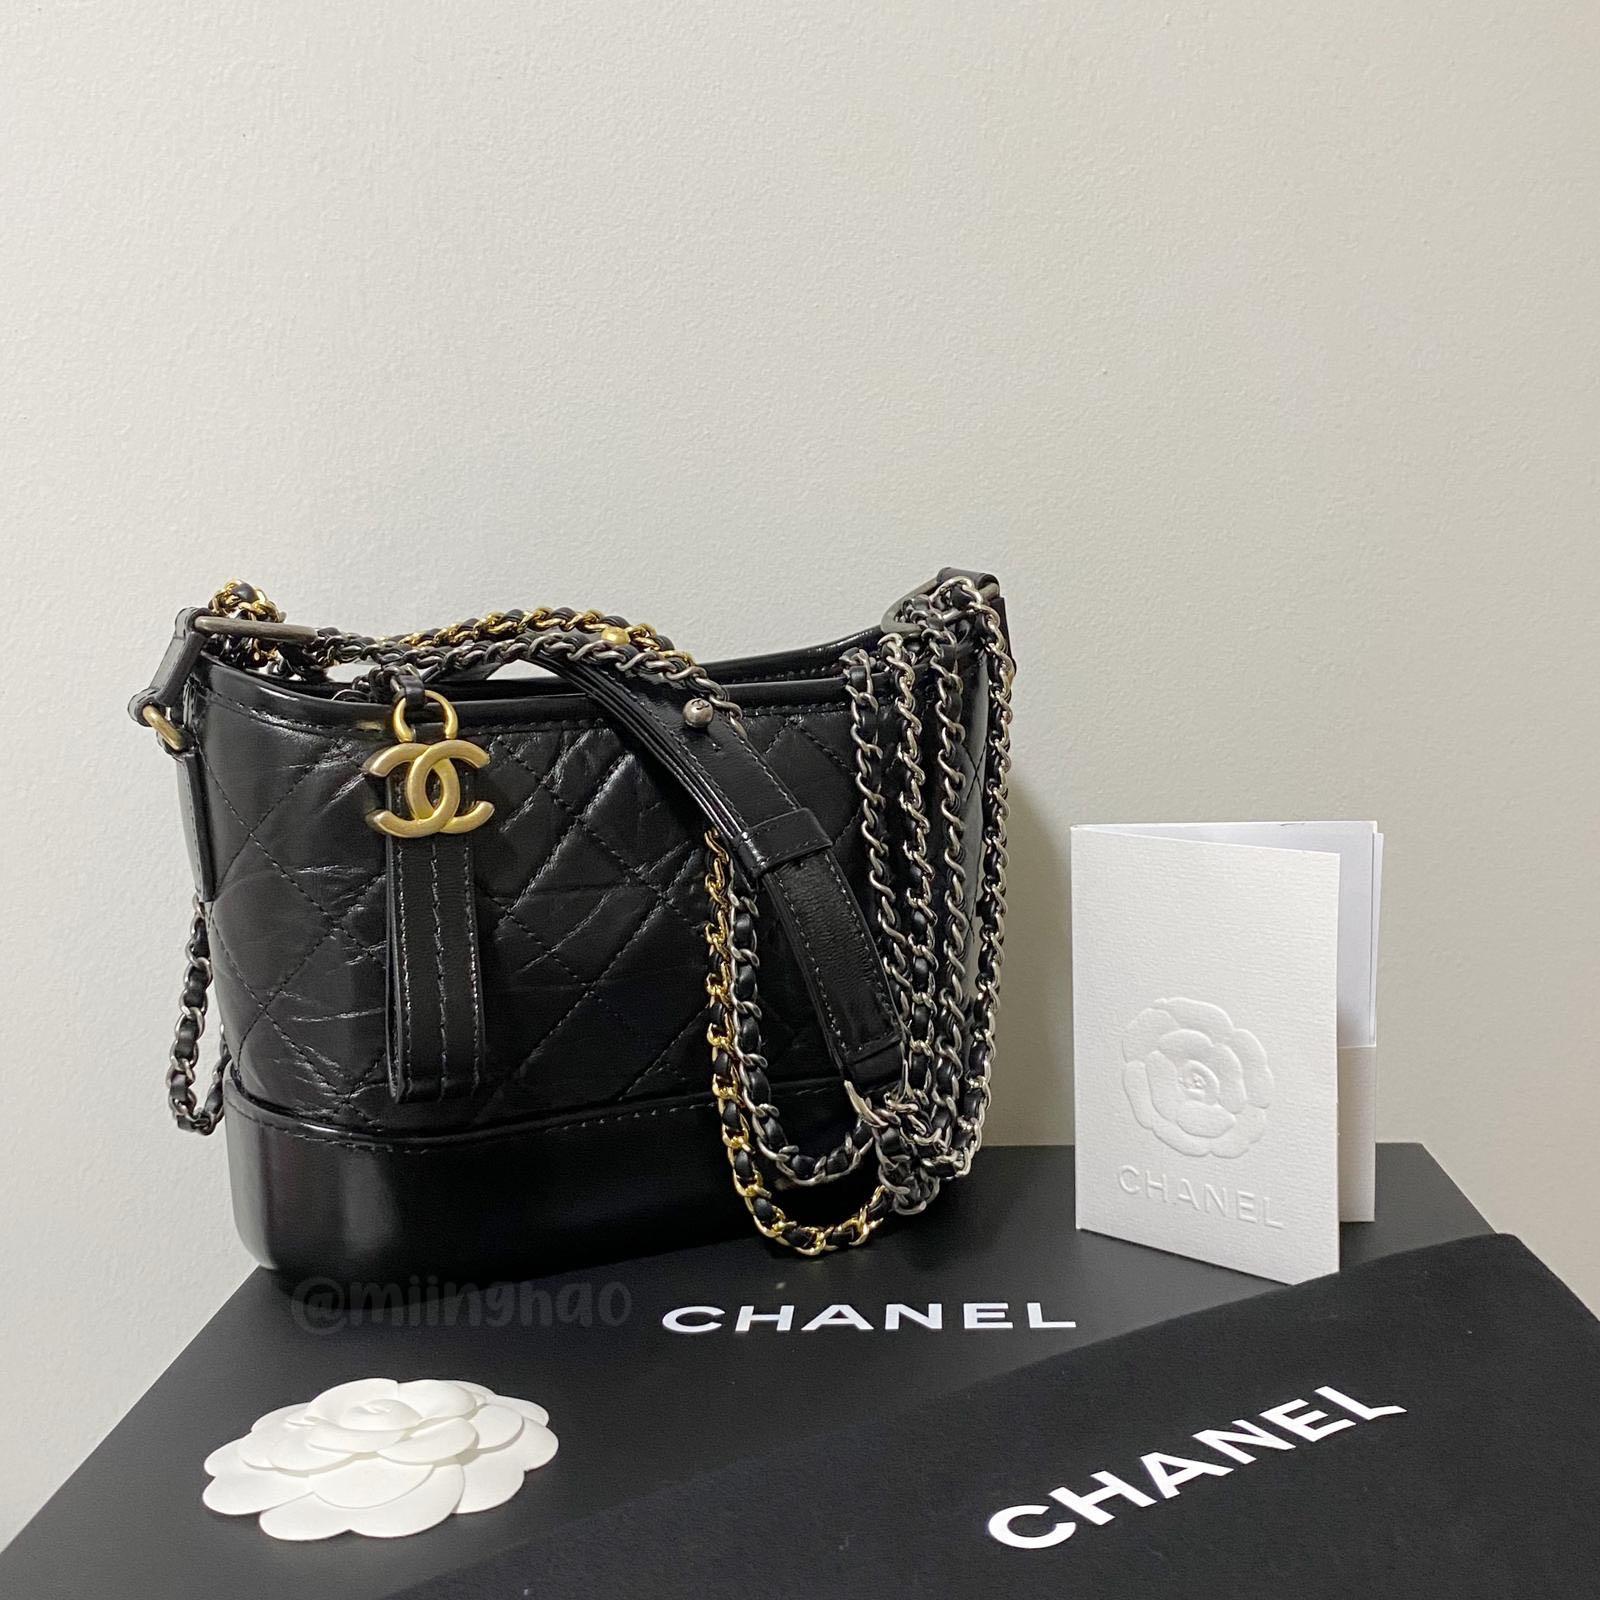 No.3452-Chanel Small Gabrielle Hobo Bag With Handle – Gallery Luxe